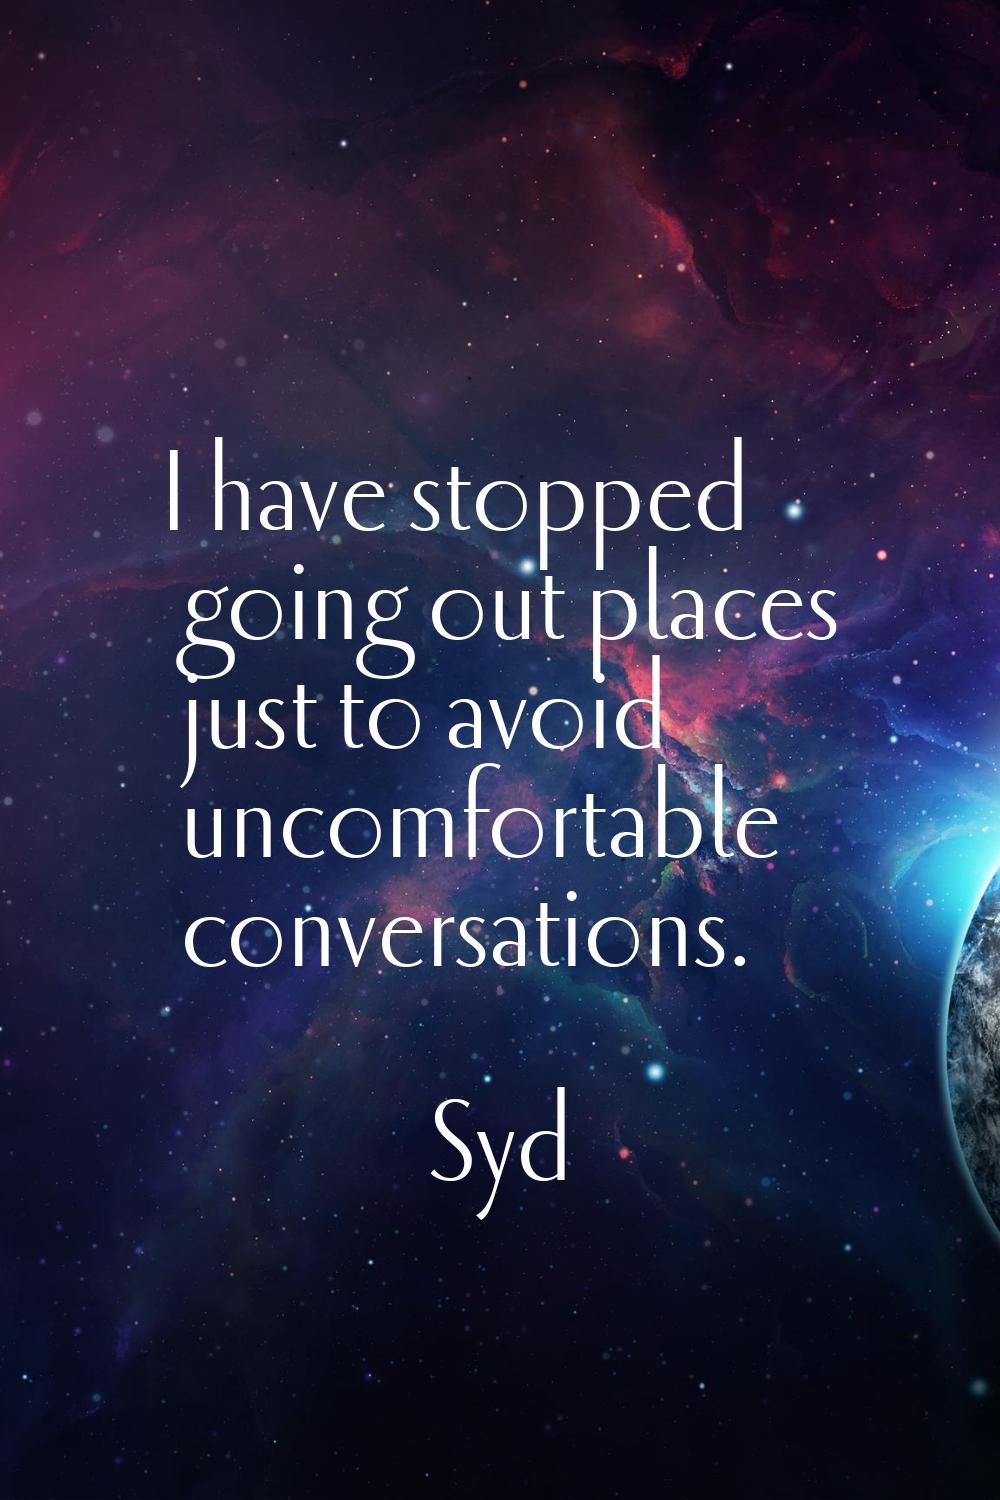 I have stopped going out places just to avoid uncomfortable conversations.